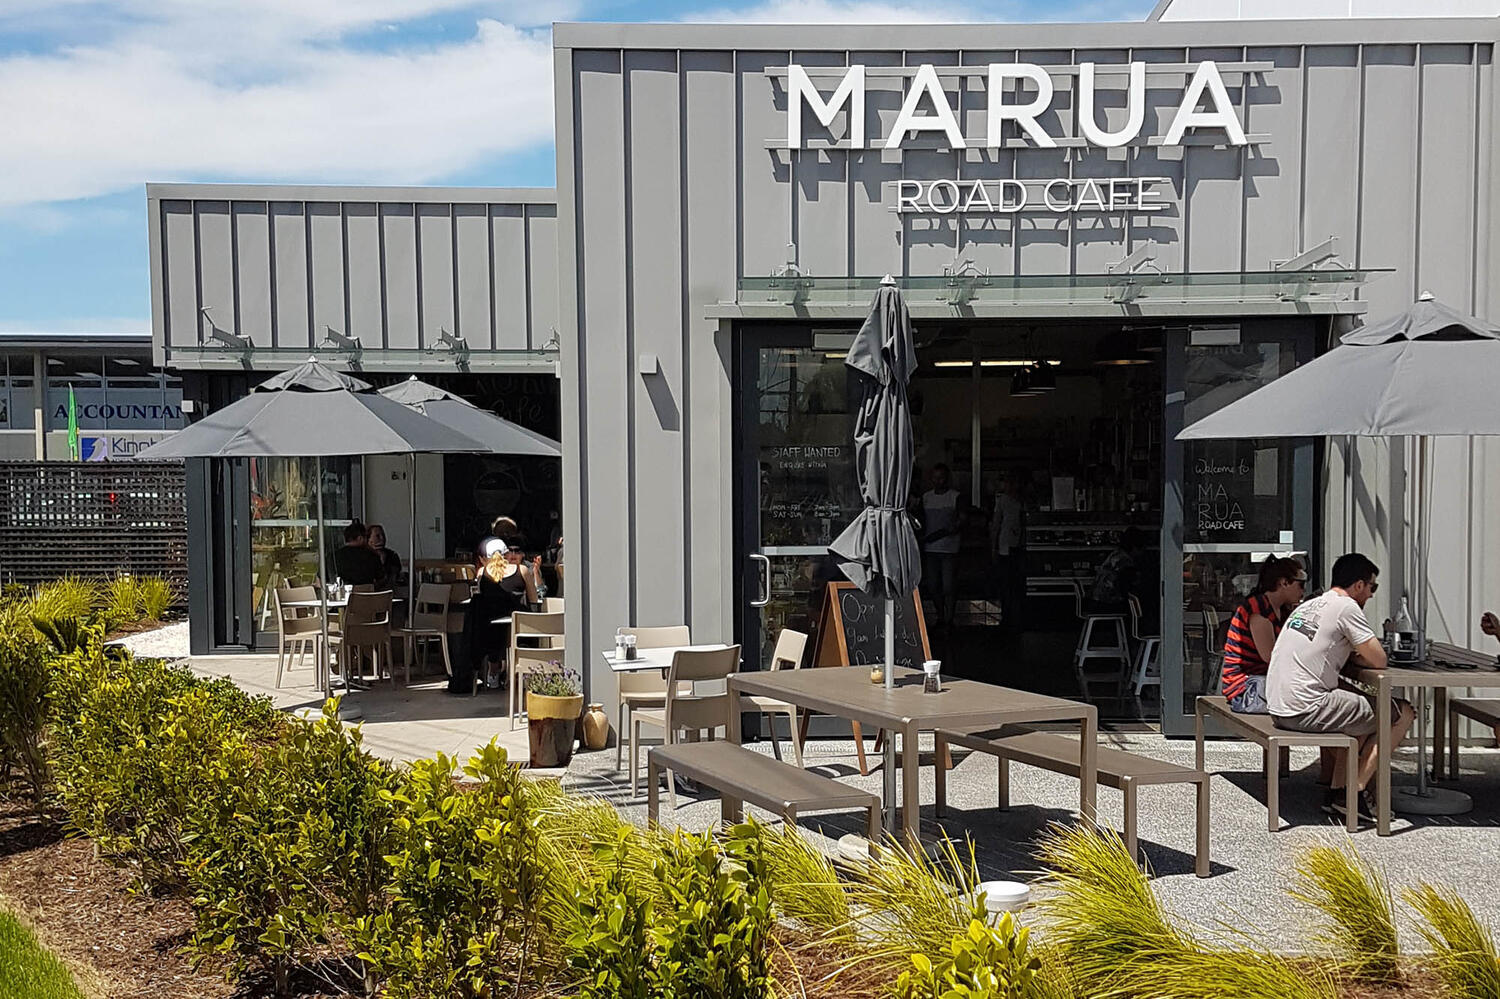 Marua Road Cafe Sold By Kakapo Business Sales